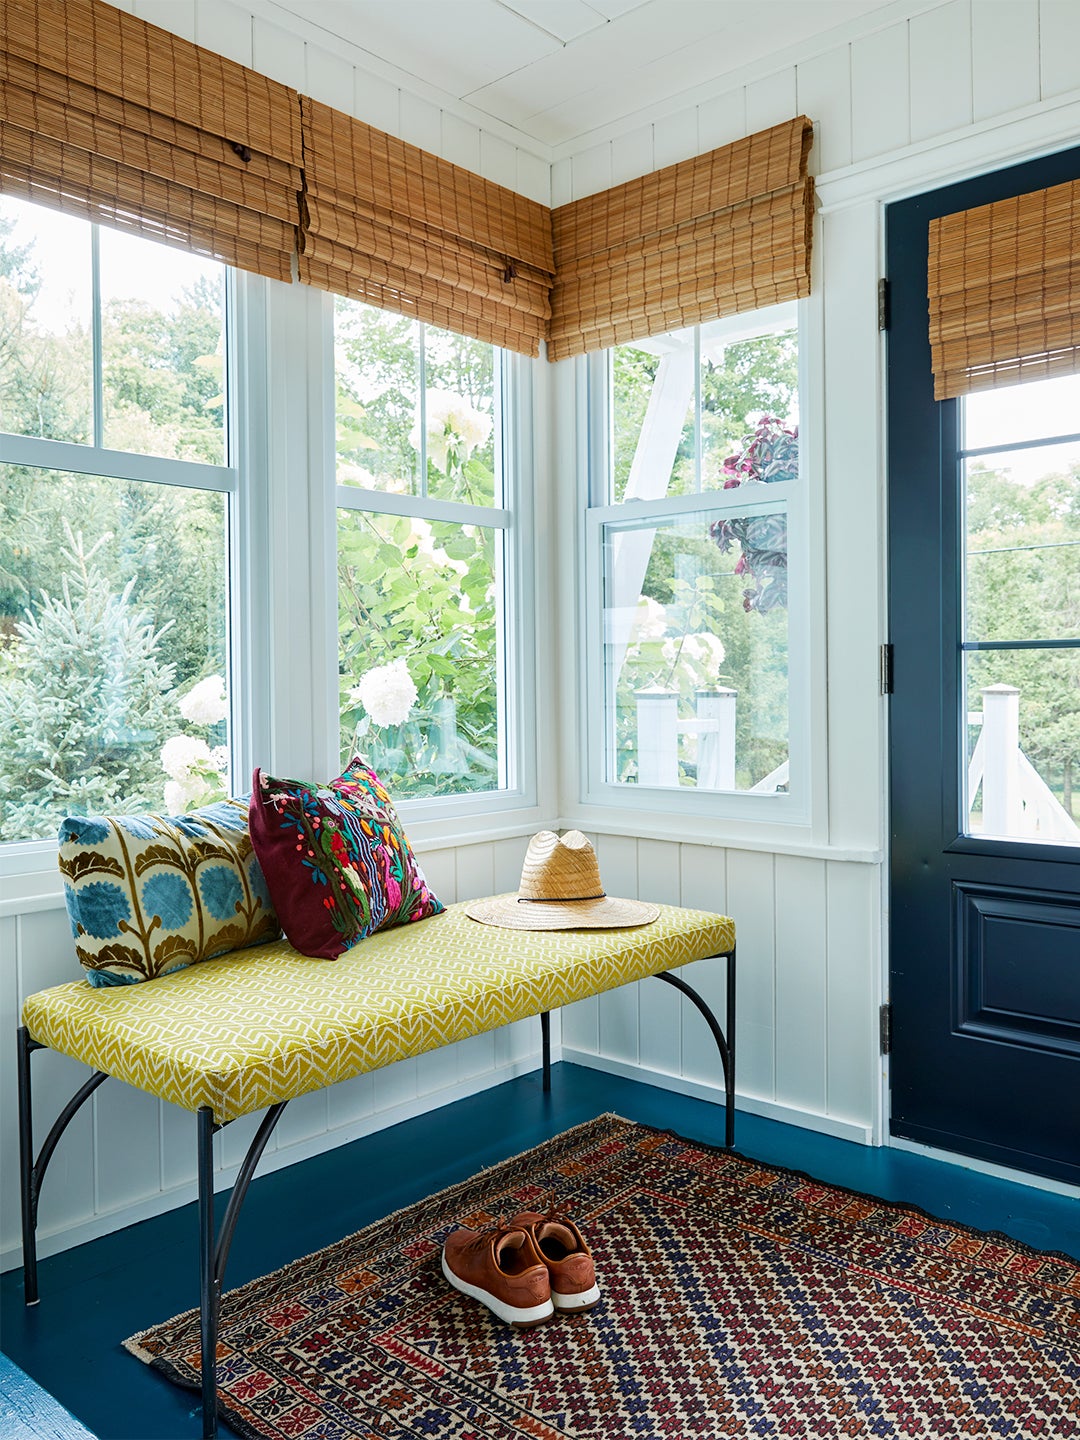 A Vintage eBay Score Gave This Old Cottage the Perfect Lived-In Feel